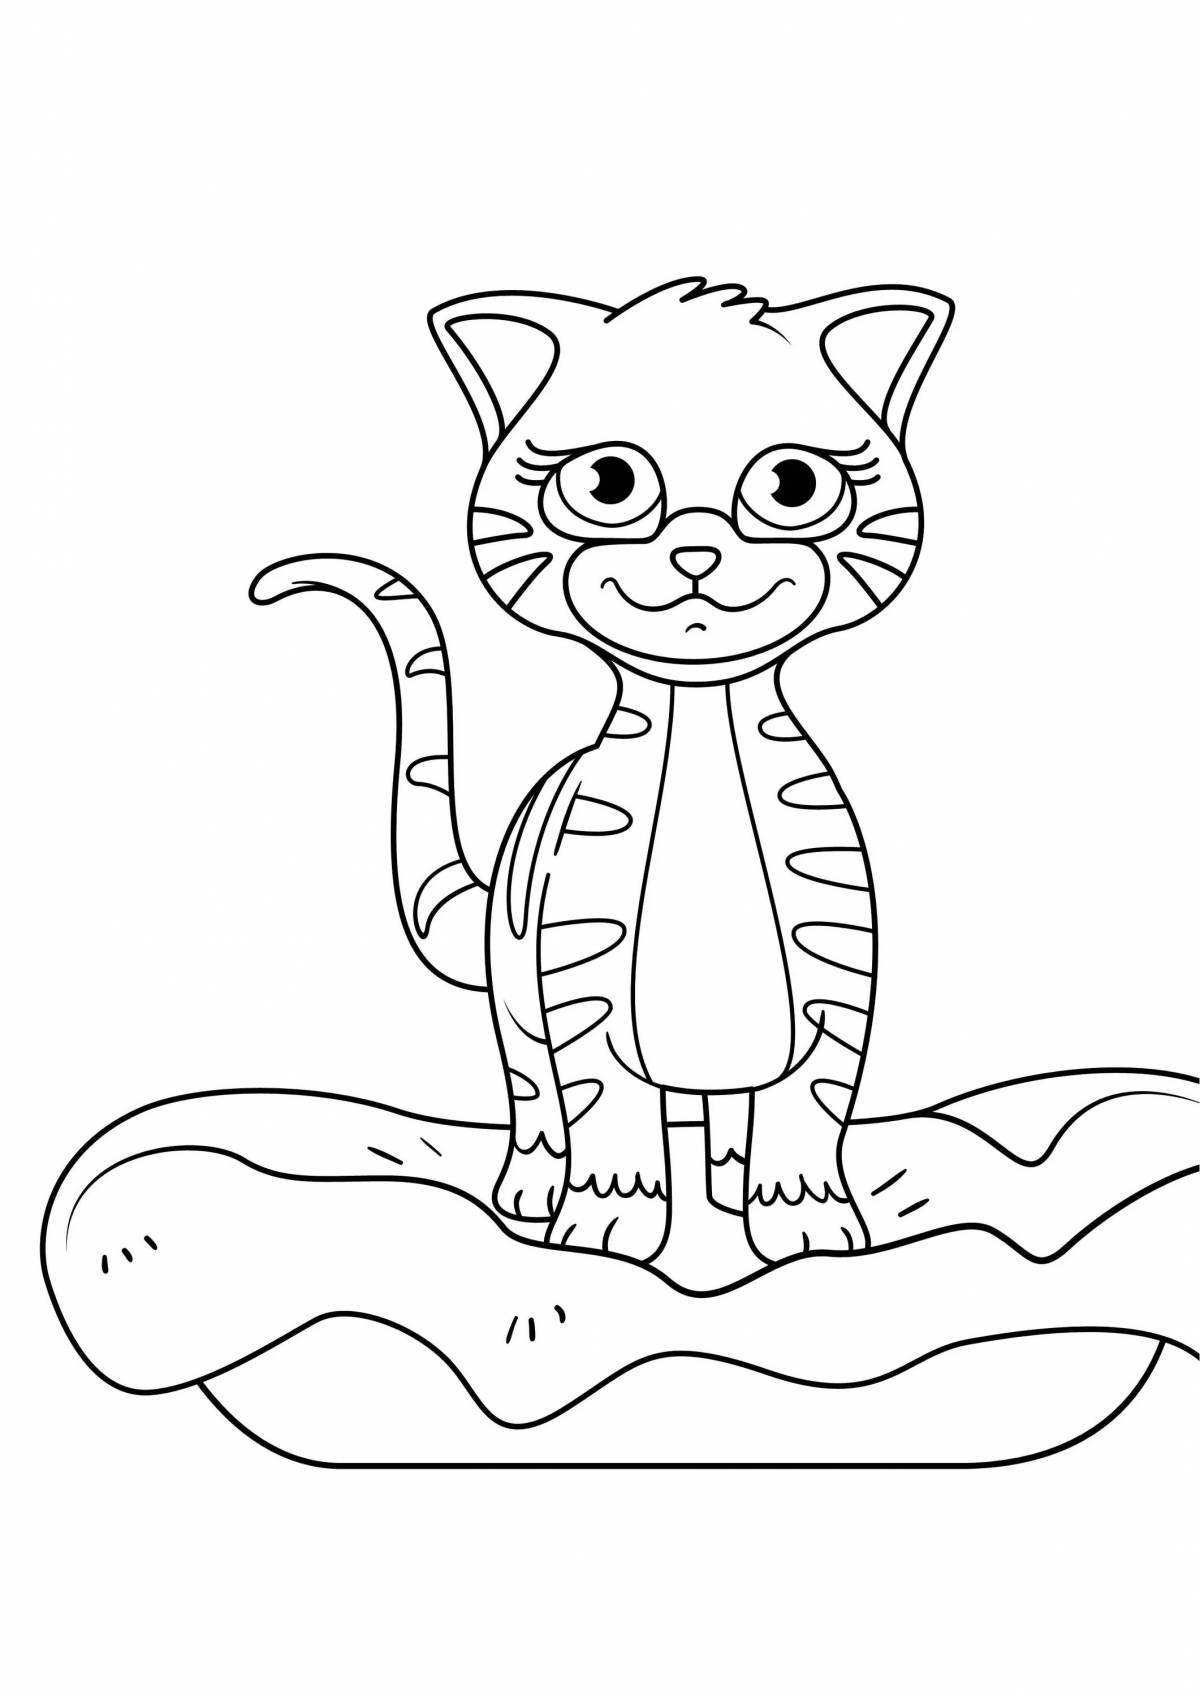 Felicity holiday cat coloring page